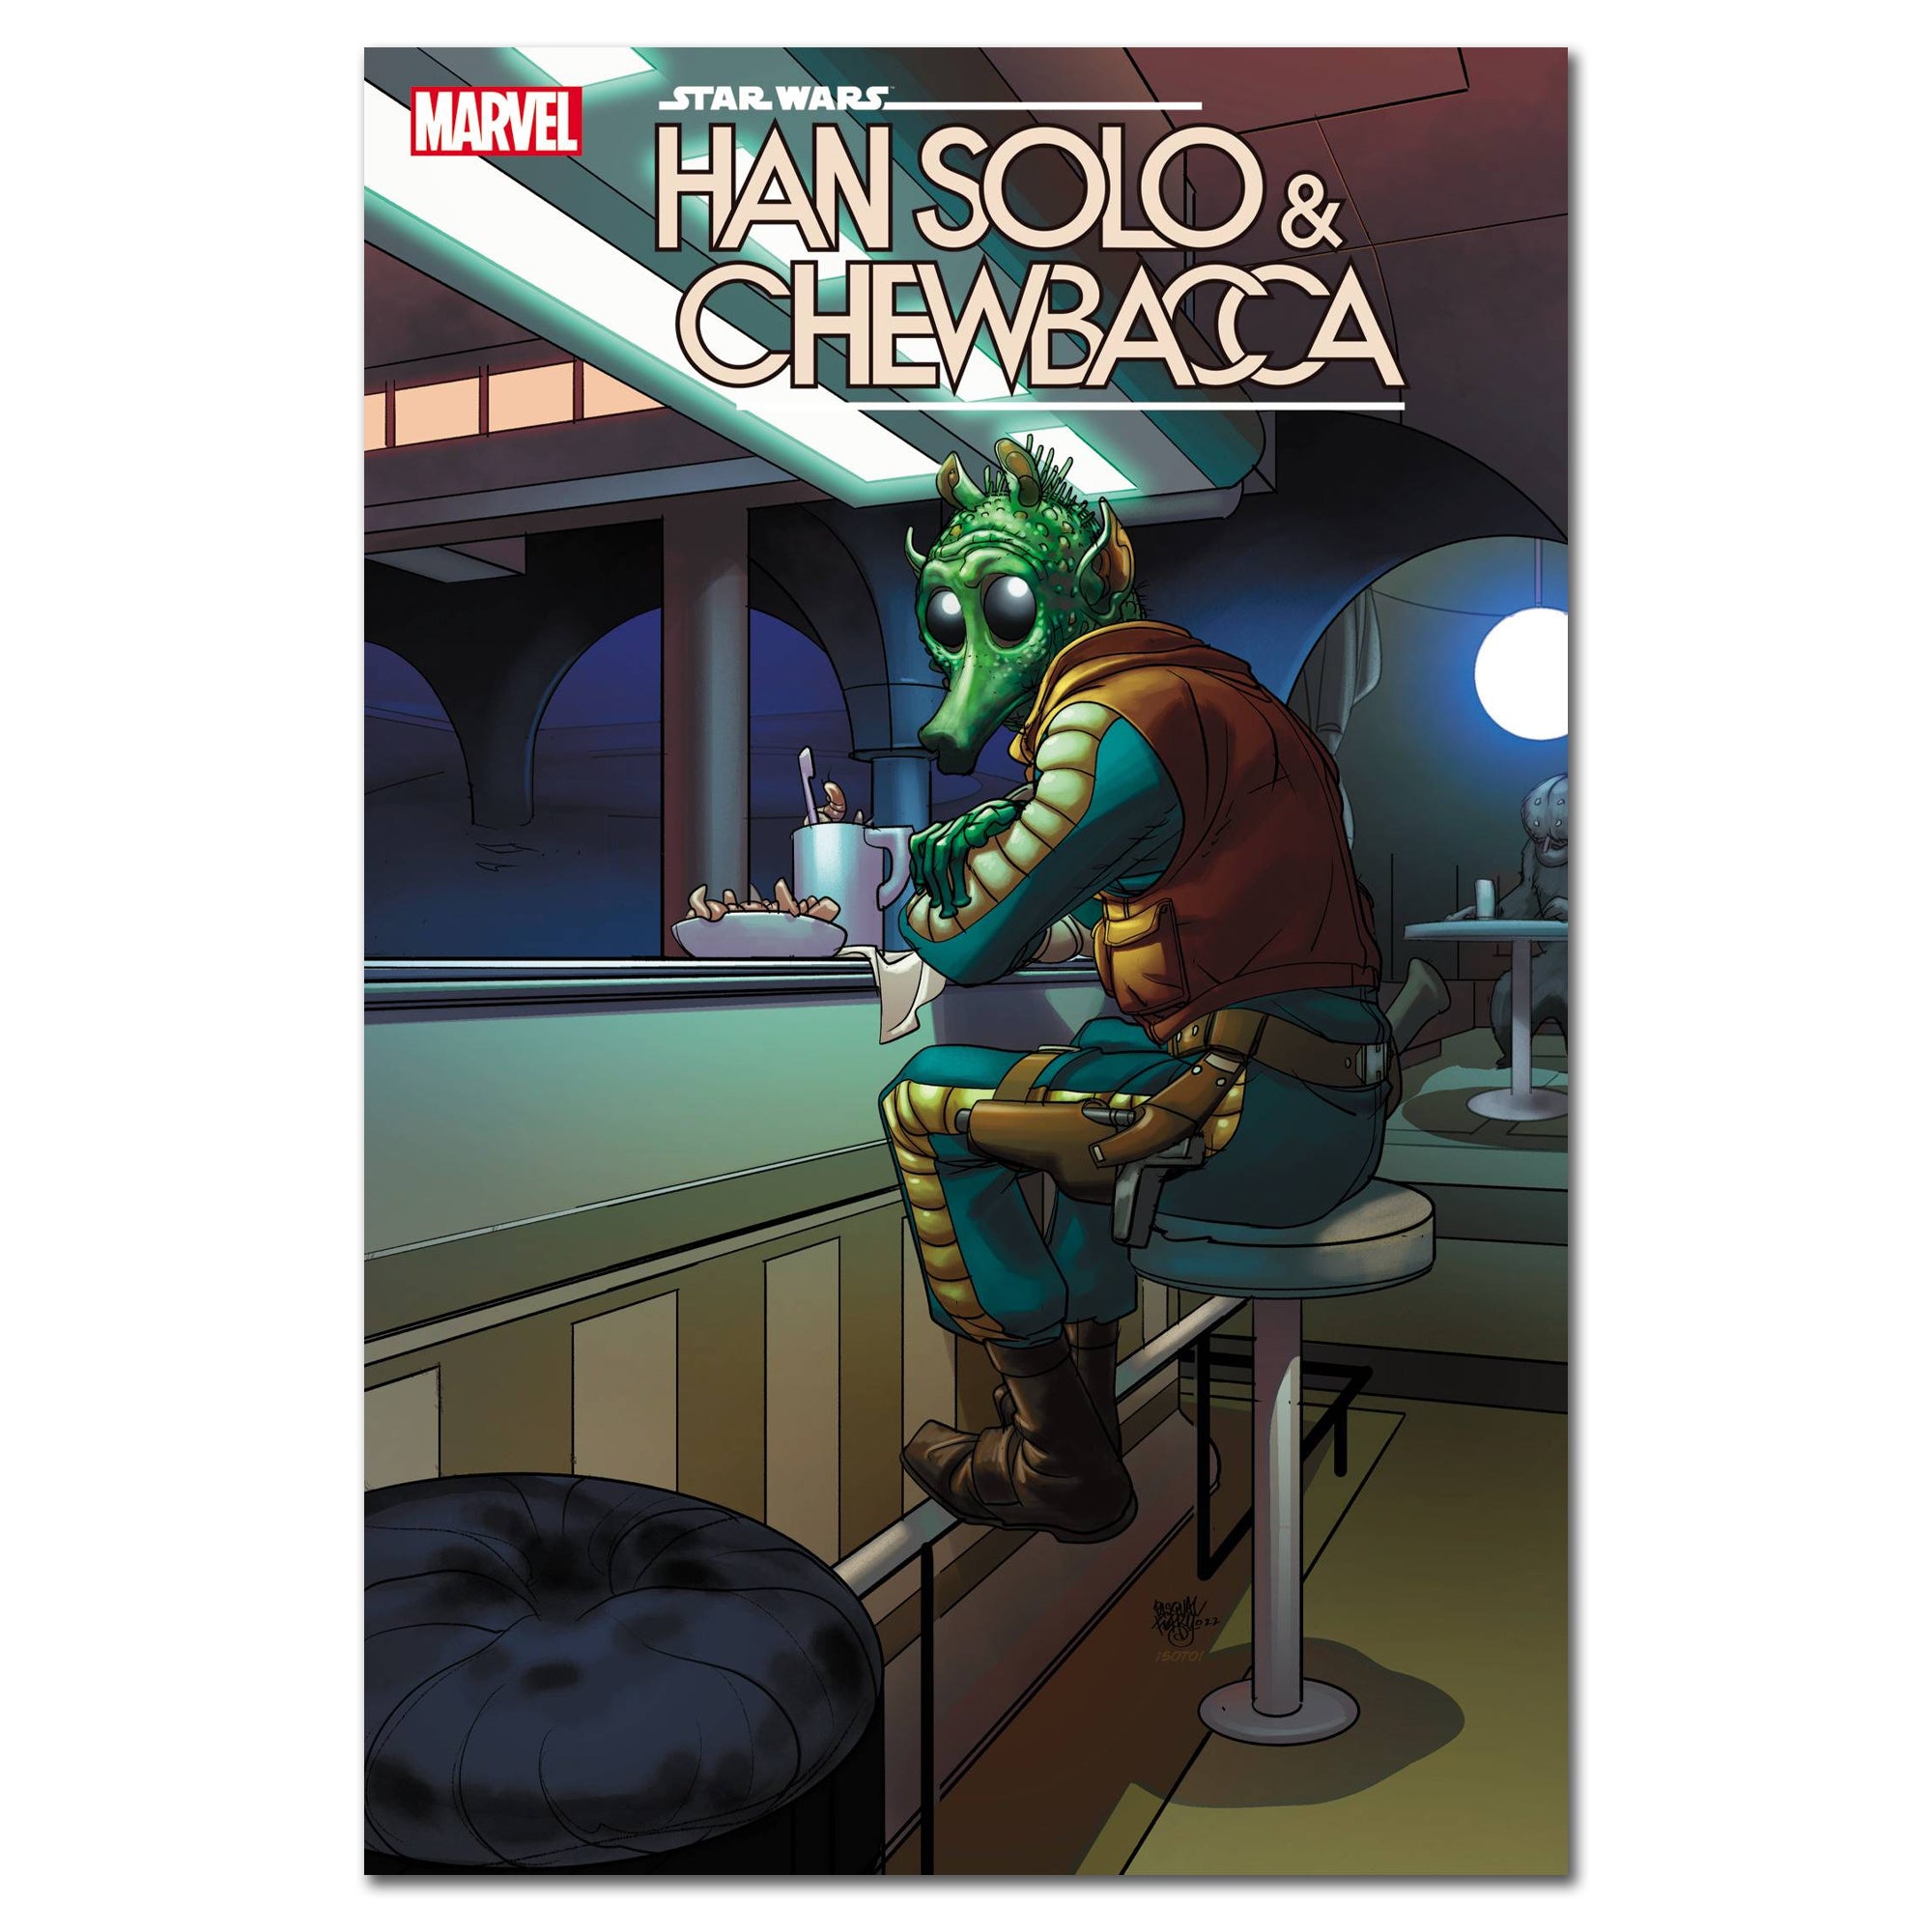 Star Wars Han Solo & Chewbacca #7 Cover Variant FERRY FINALSALE